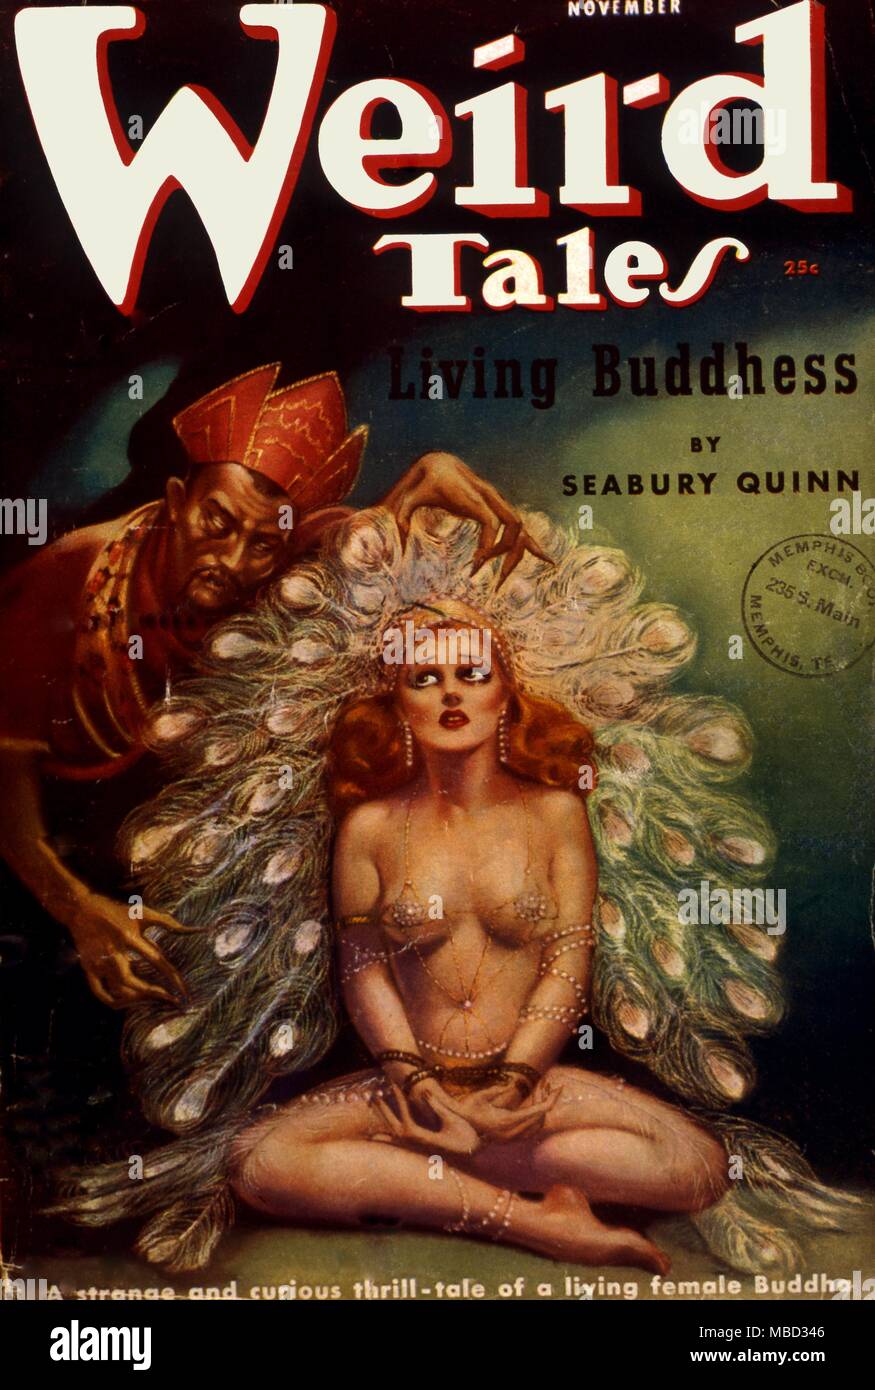 Science Fiction and Horror Magazines. Cover of Weird Tales, November 1937. Artwork by Margaret Brundage. Stock Photo